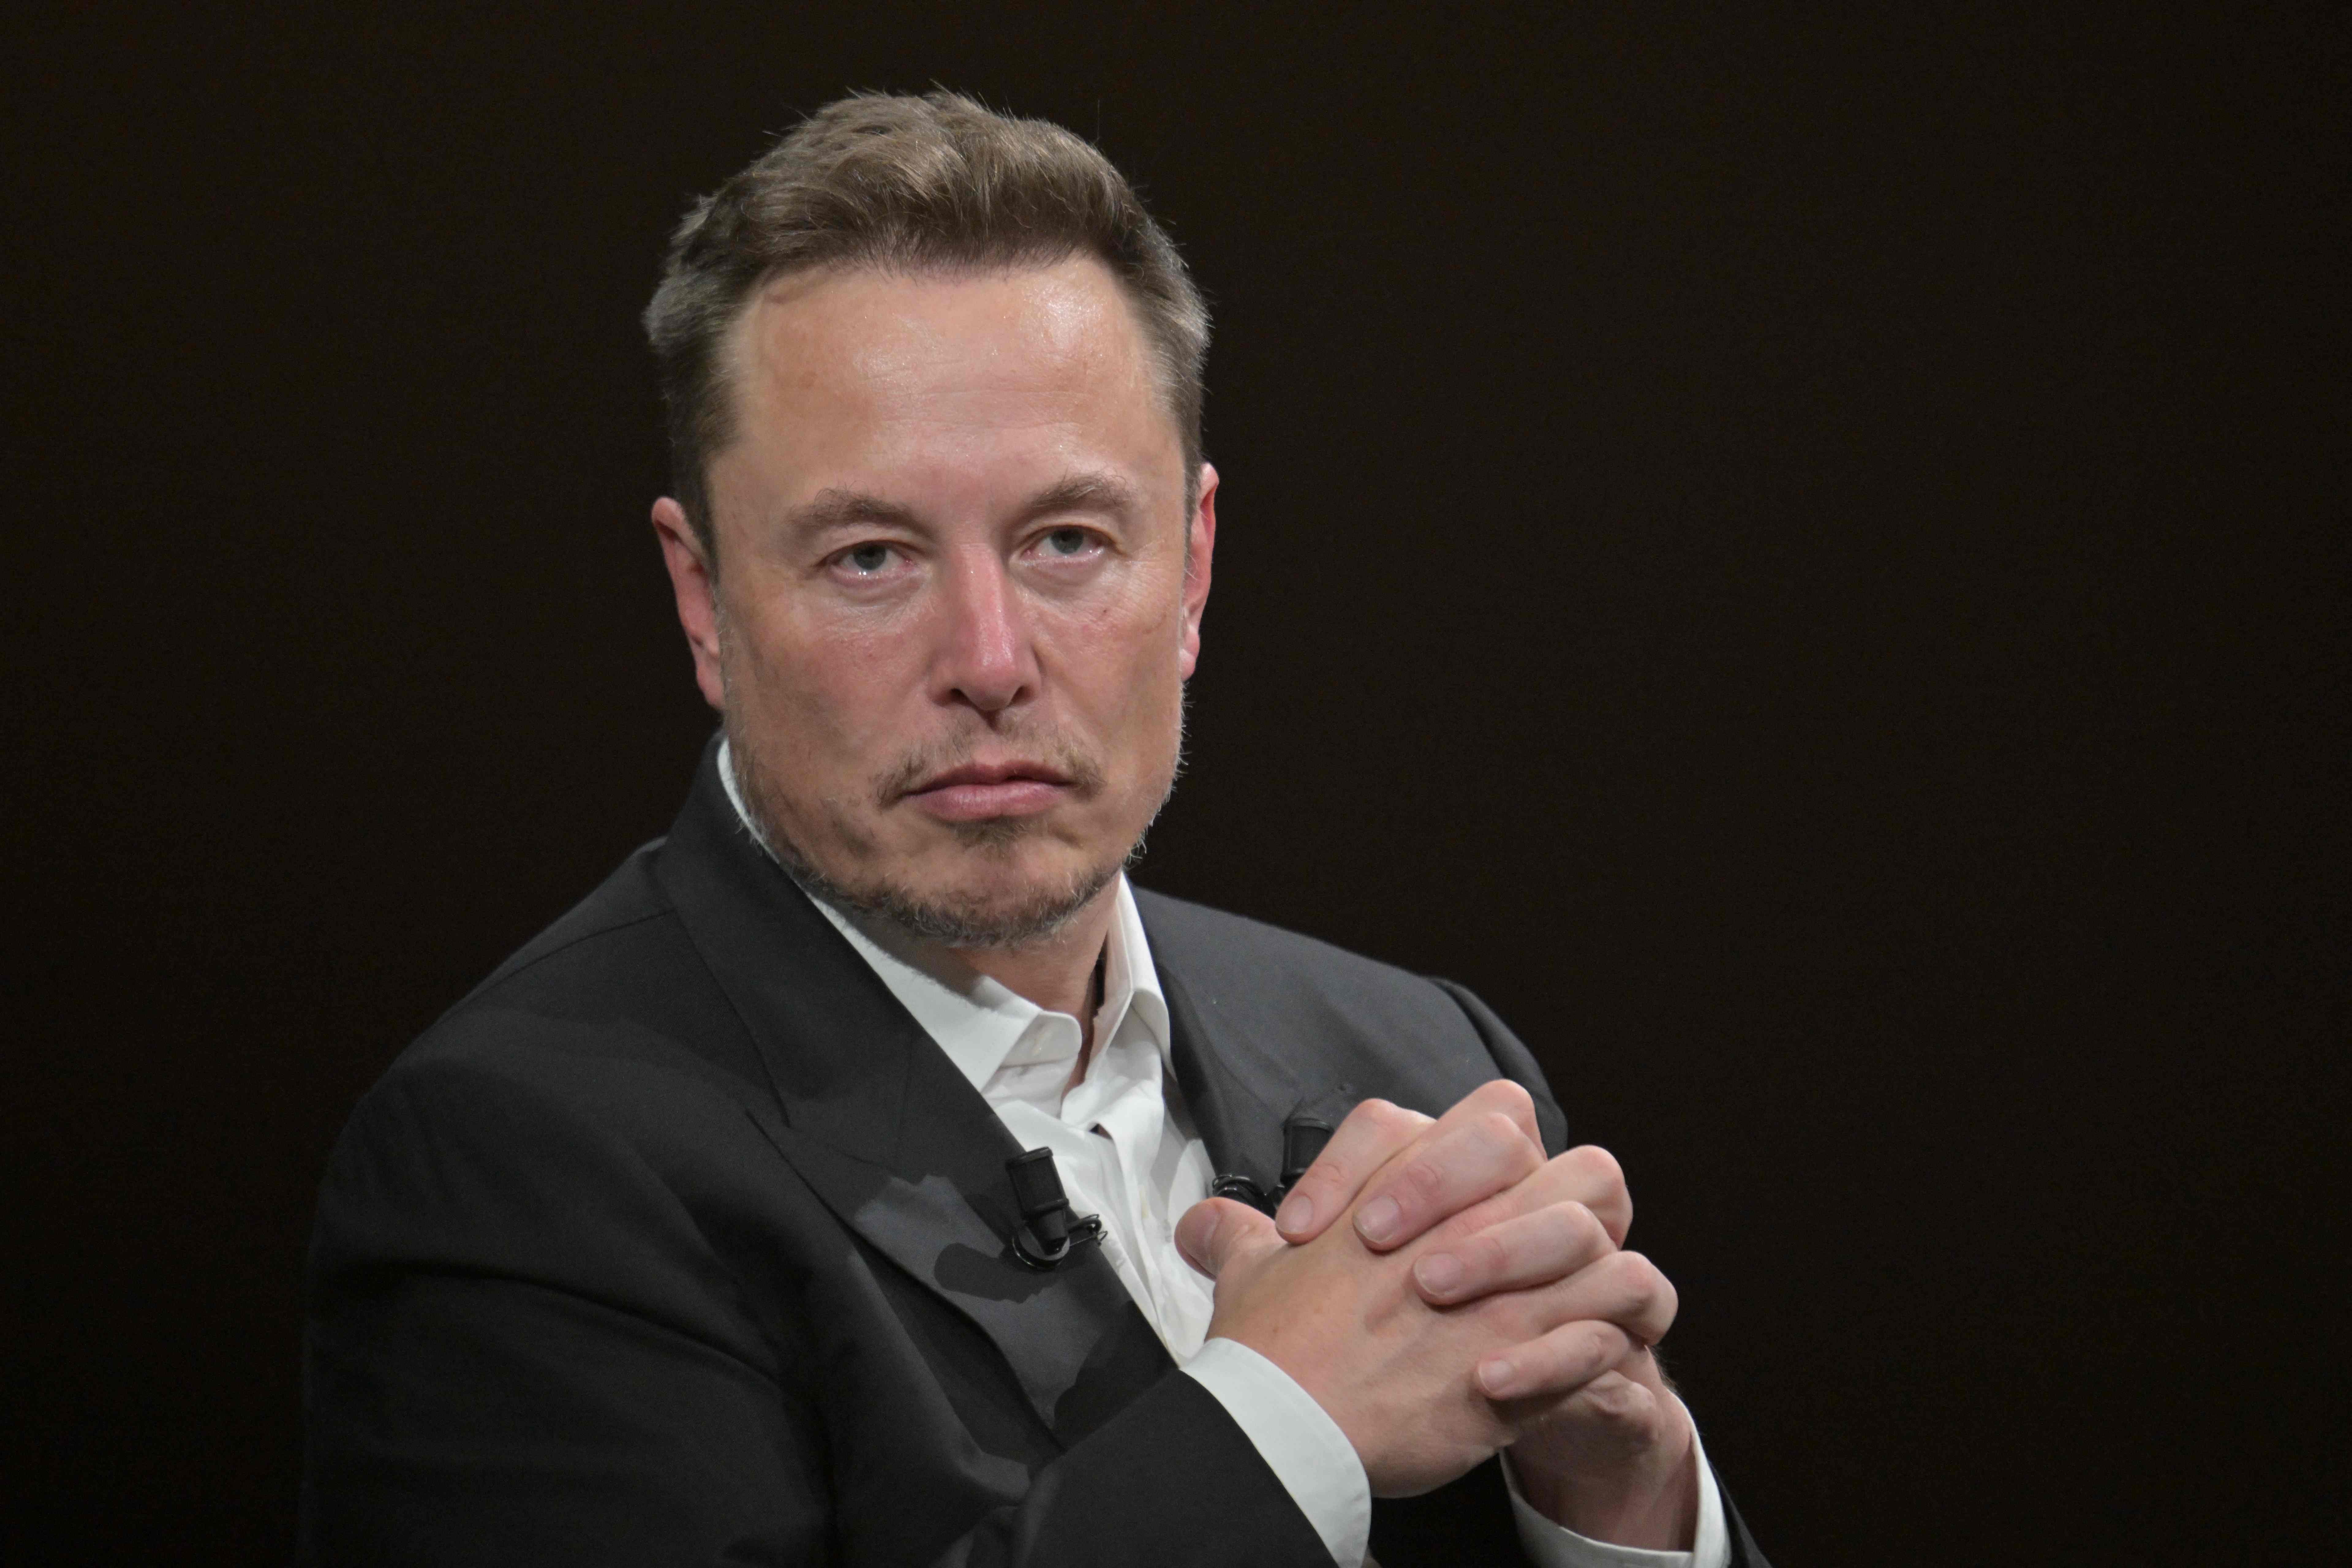 Elon Musk Borrowed $1 Billion From SpaceX in Same Month of Twitter